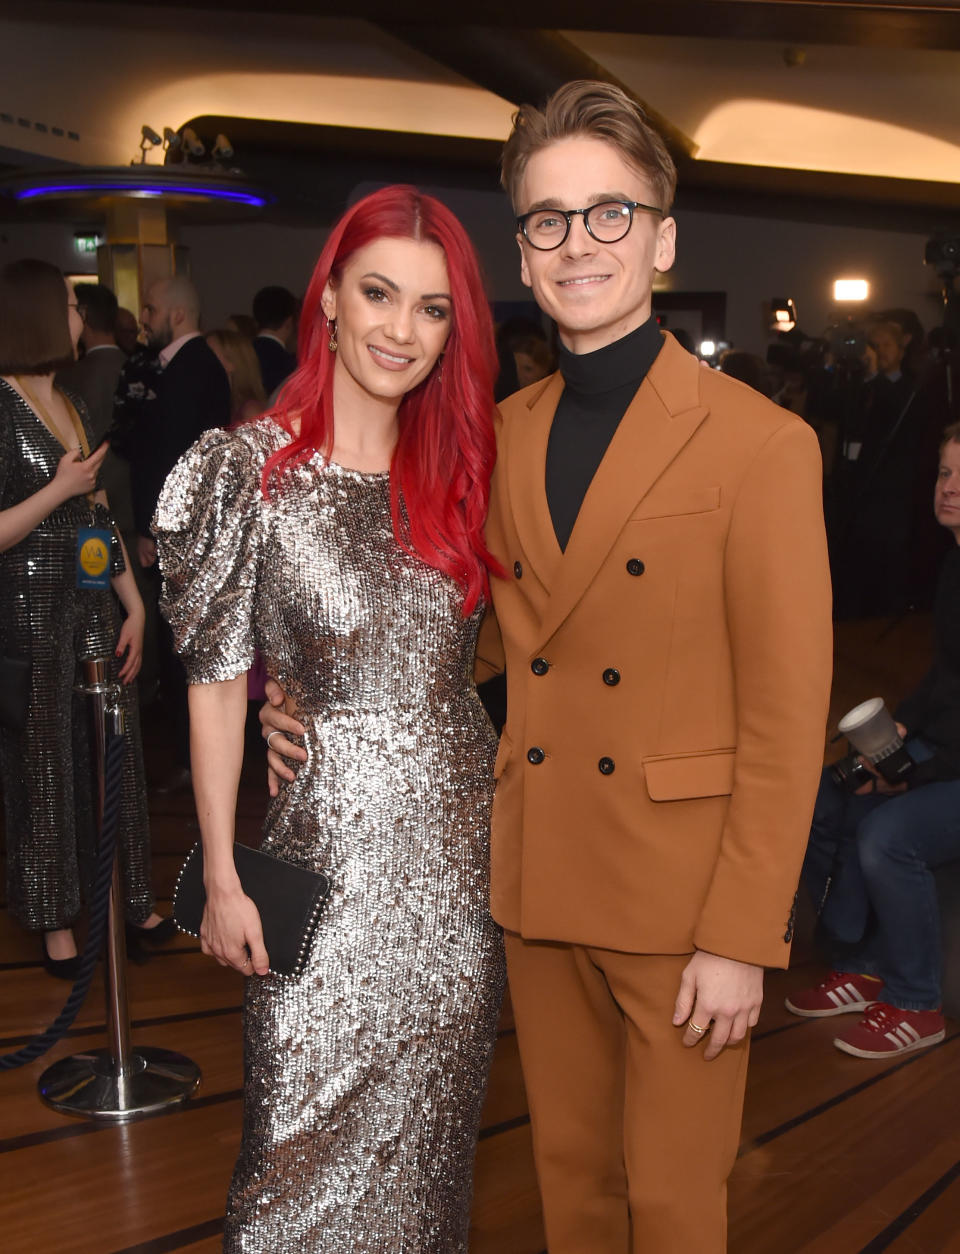 LONDON, ENGLAND - MARCH 01:  Dianne Buswell and Joe Sugg attend The WhatsOnStage Awards 2020 at The Prince of Wales Theatre on March 1, 2020 in London, England.  (Photo by David M. Benett/Dave Benett/Getty Images)